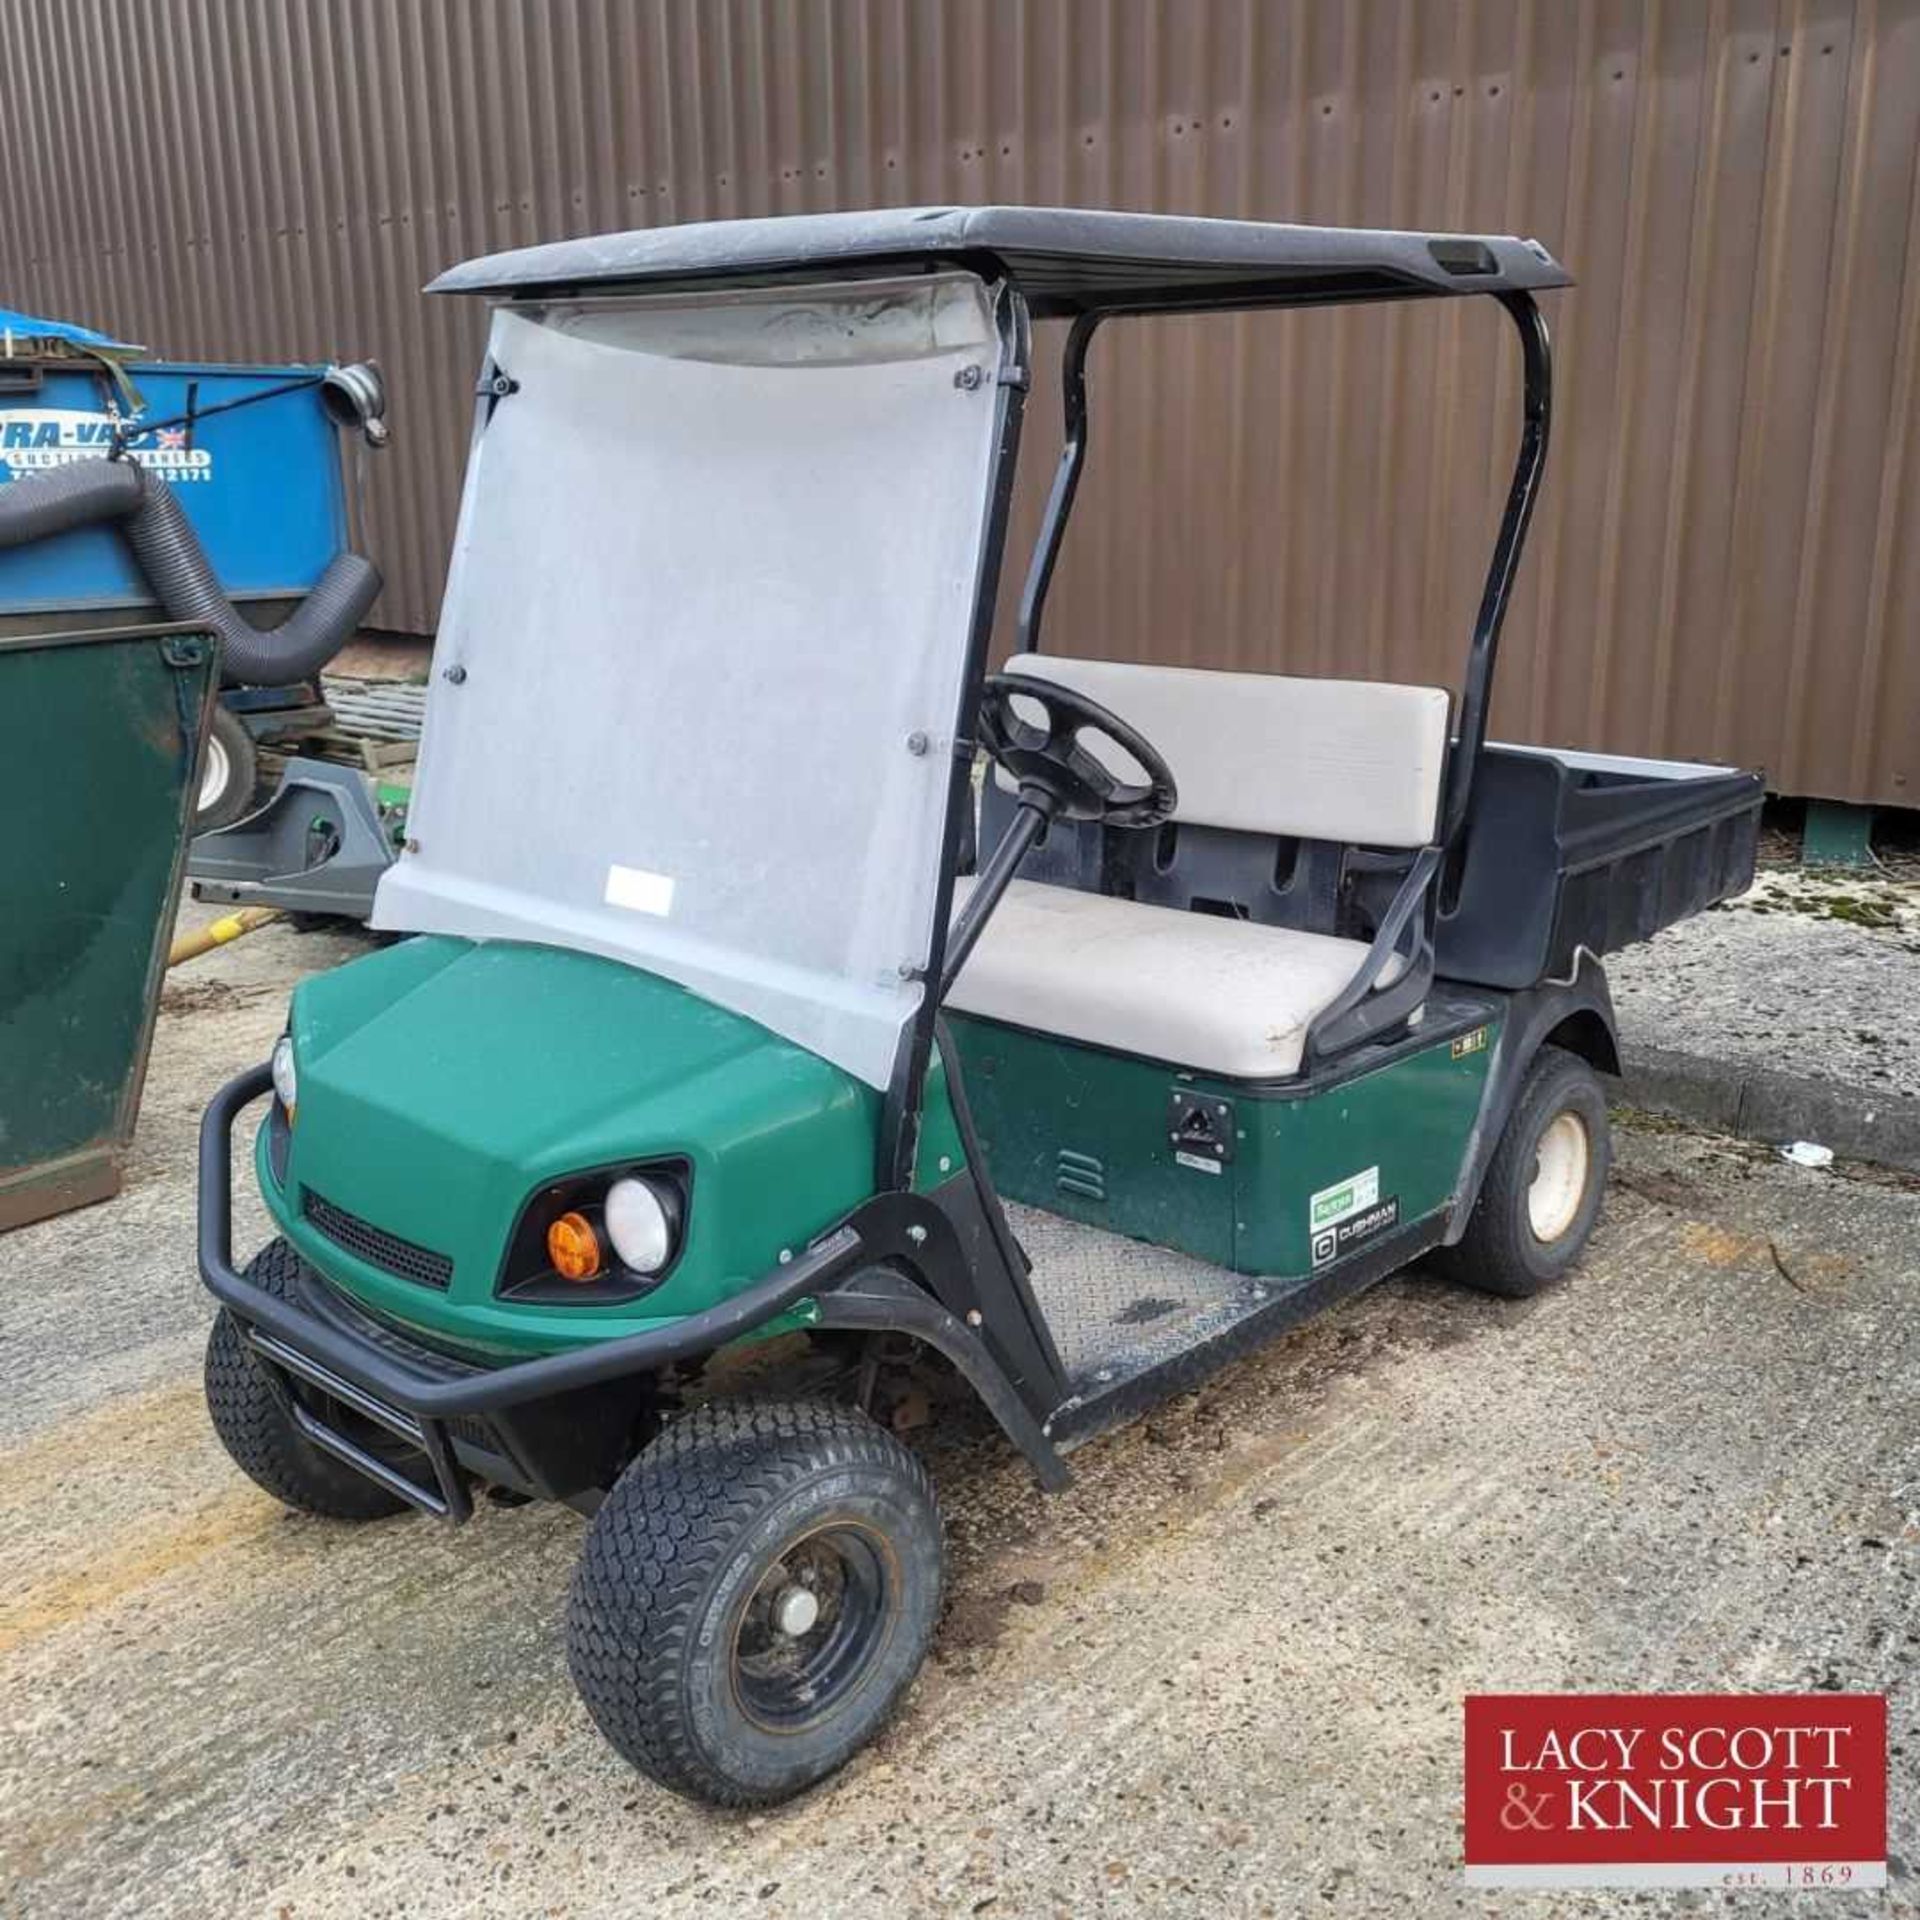 Cushman Hauler 800E Golf Buggy. (Year 2017). Comes with mains charger. (Located in Euston, Thetford)